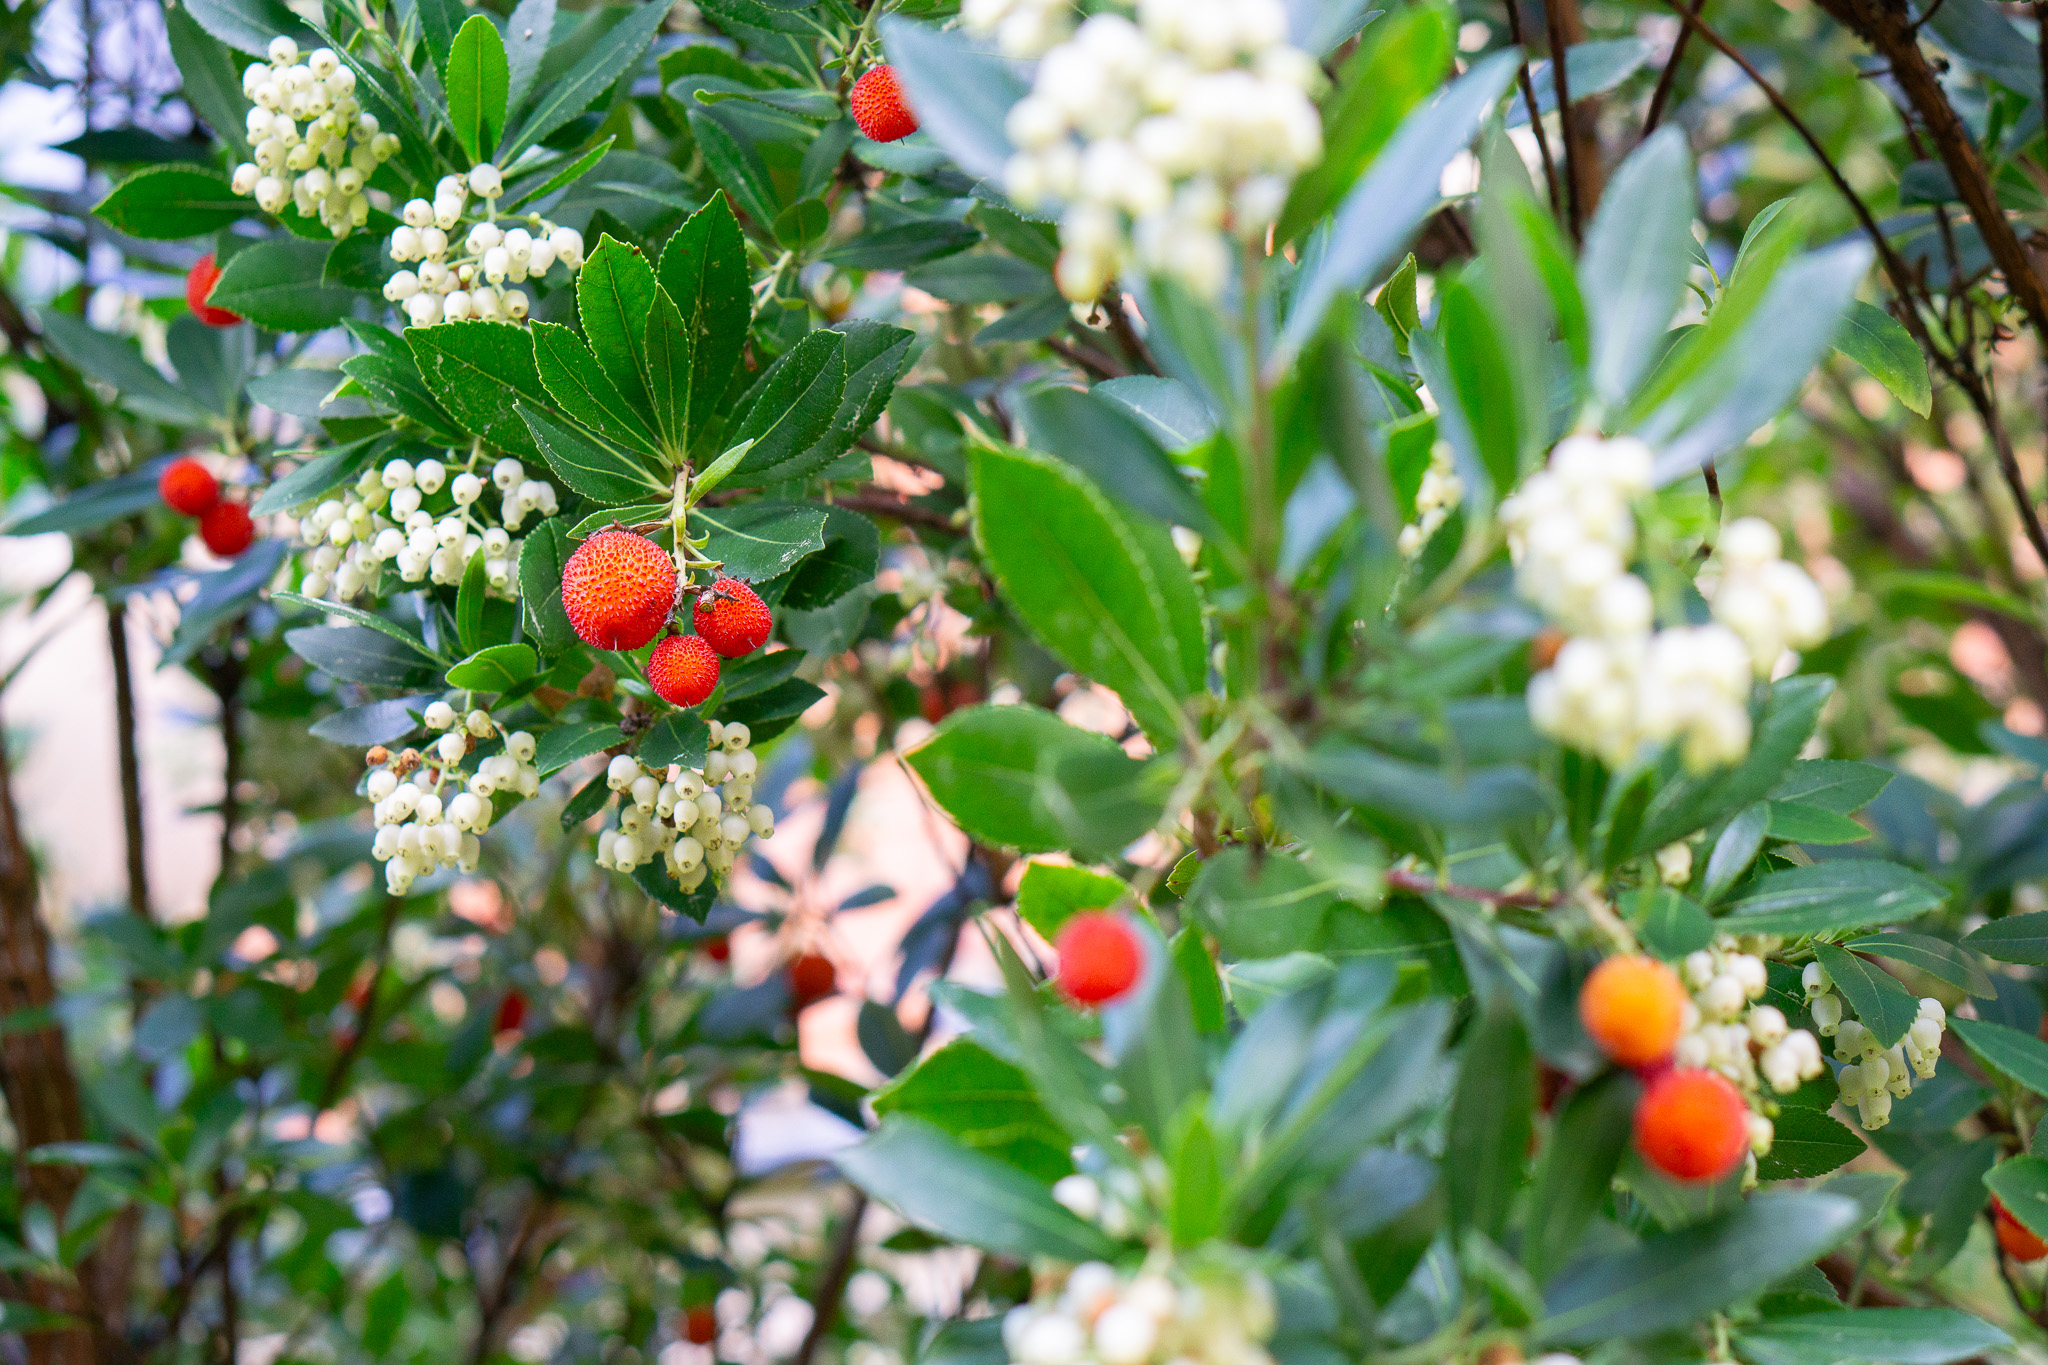 The Strawberry Tree gets its name from its distinctive red fruits, which somewhat resemble the berry. Despite their delicious, slightly peach and damson-like flavour, their many tiny seeds make eating the raw fruit an overall unpleasant experience, reflected in the tree's latin moniker which translates roughly as 'the tree I eat only once'.